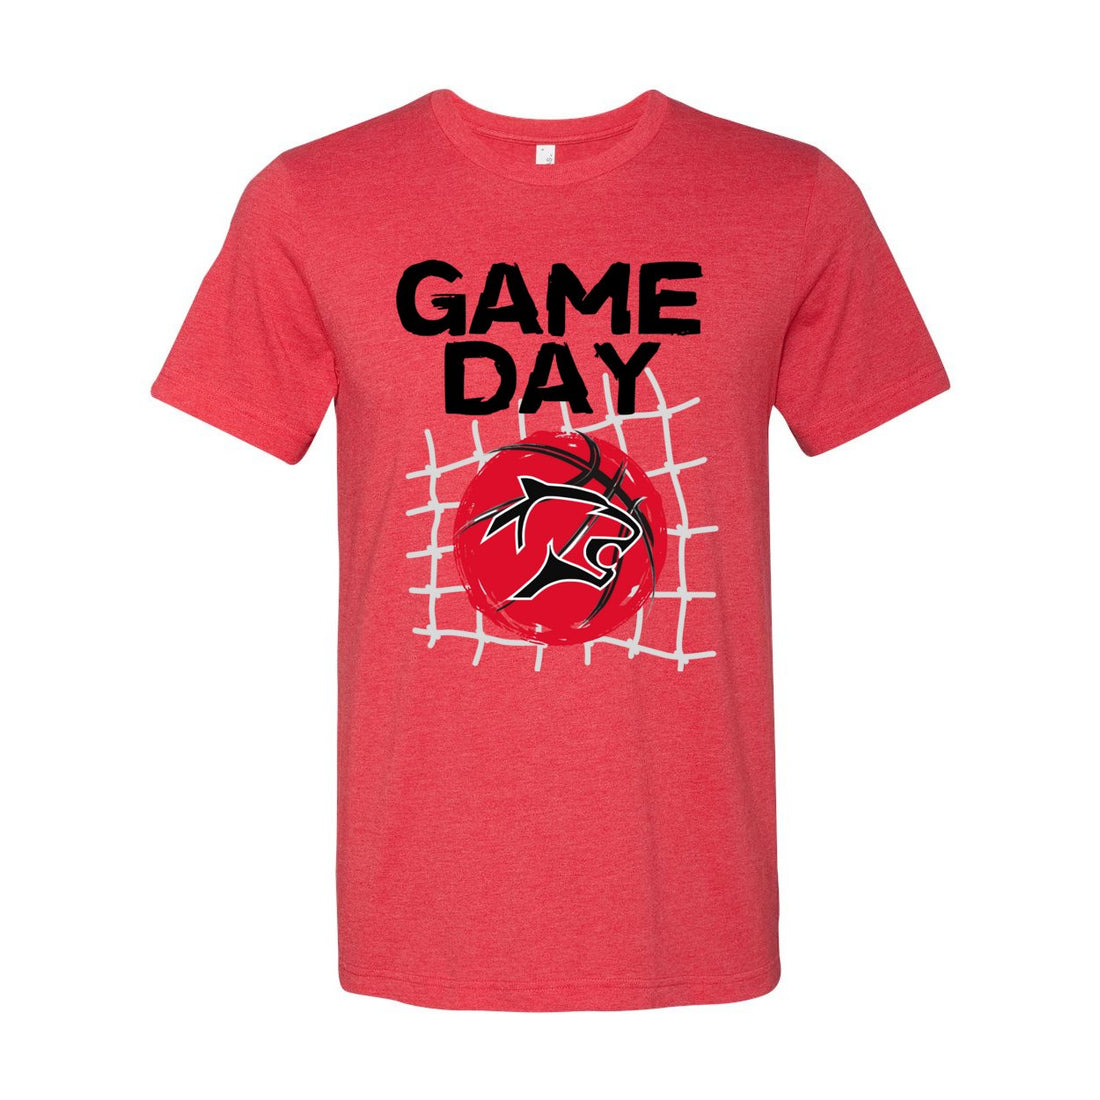 Panther Basketball Game Day Tee - T-Shirts - Positively Sassy - Panther Basketball Game Day Tee